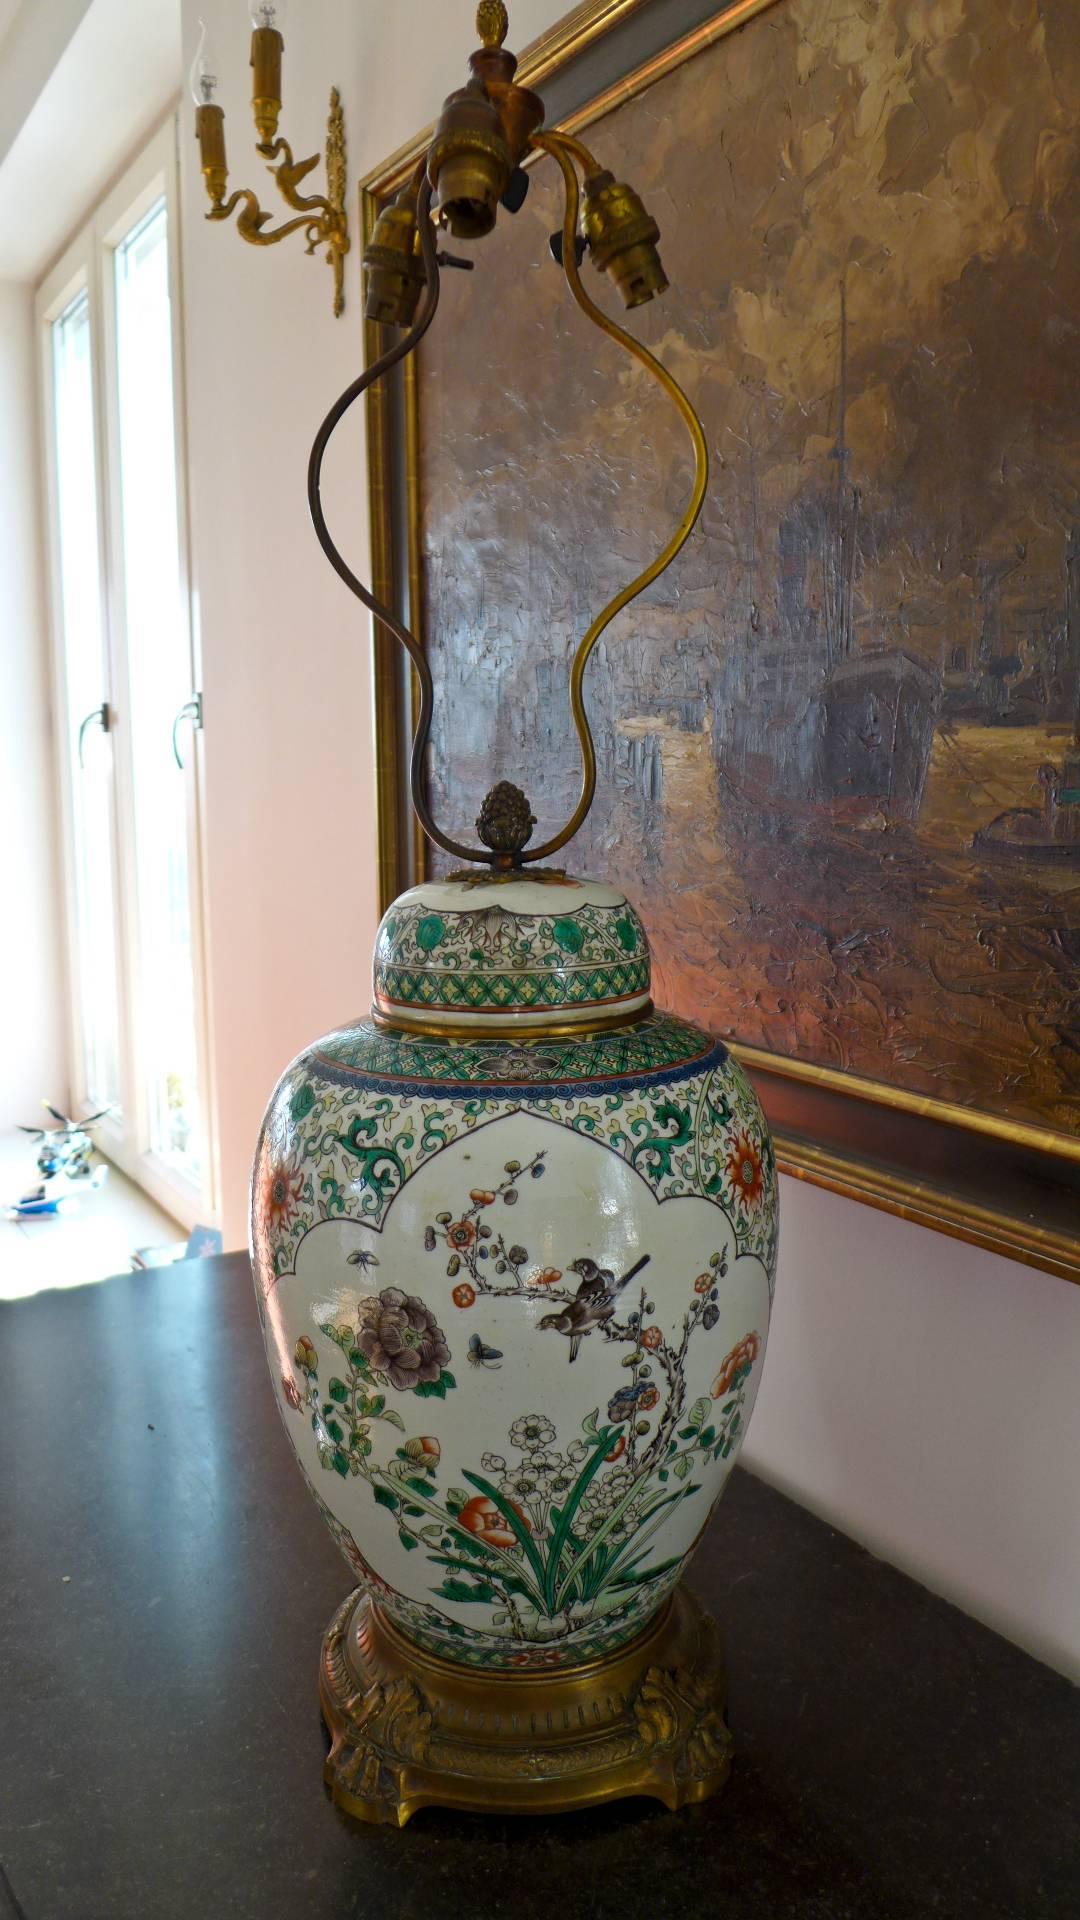 A very massive impressively decorated 19th century porcelain Chinese jar converted to a lamp with three bulbs and enamel paintings of birds and flowers and braches with blossoms. The lamp is standing on the inlade bronze base over four legs with